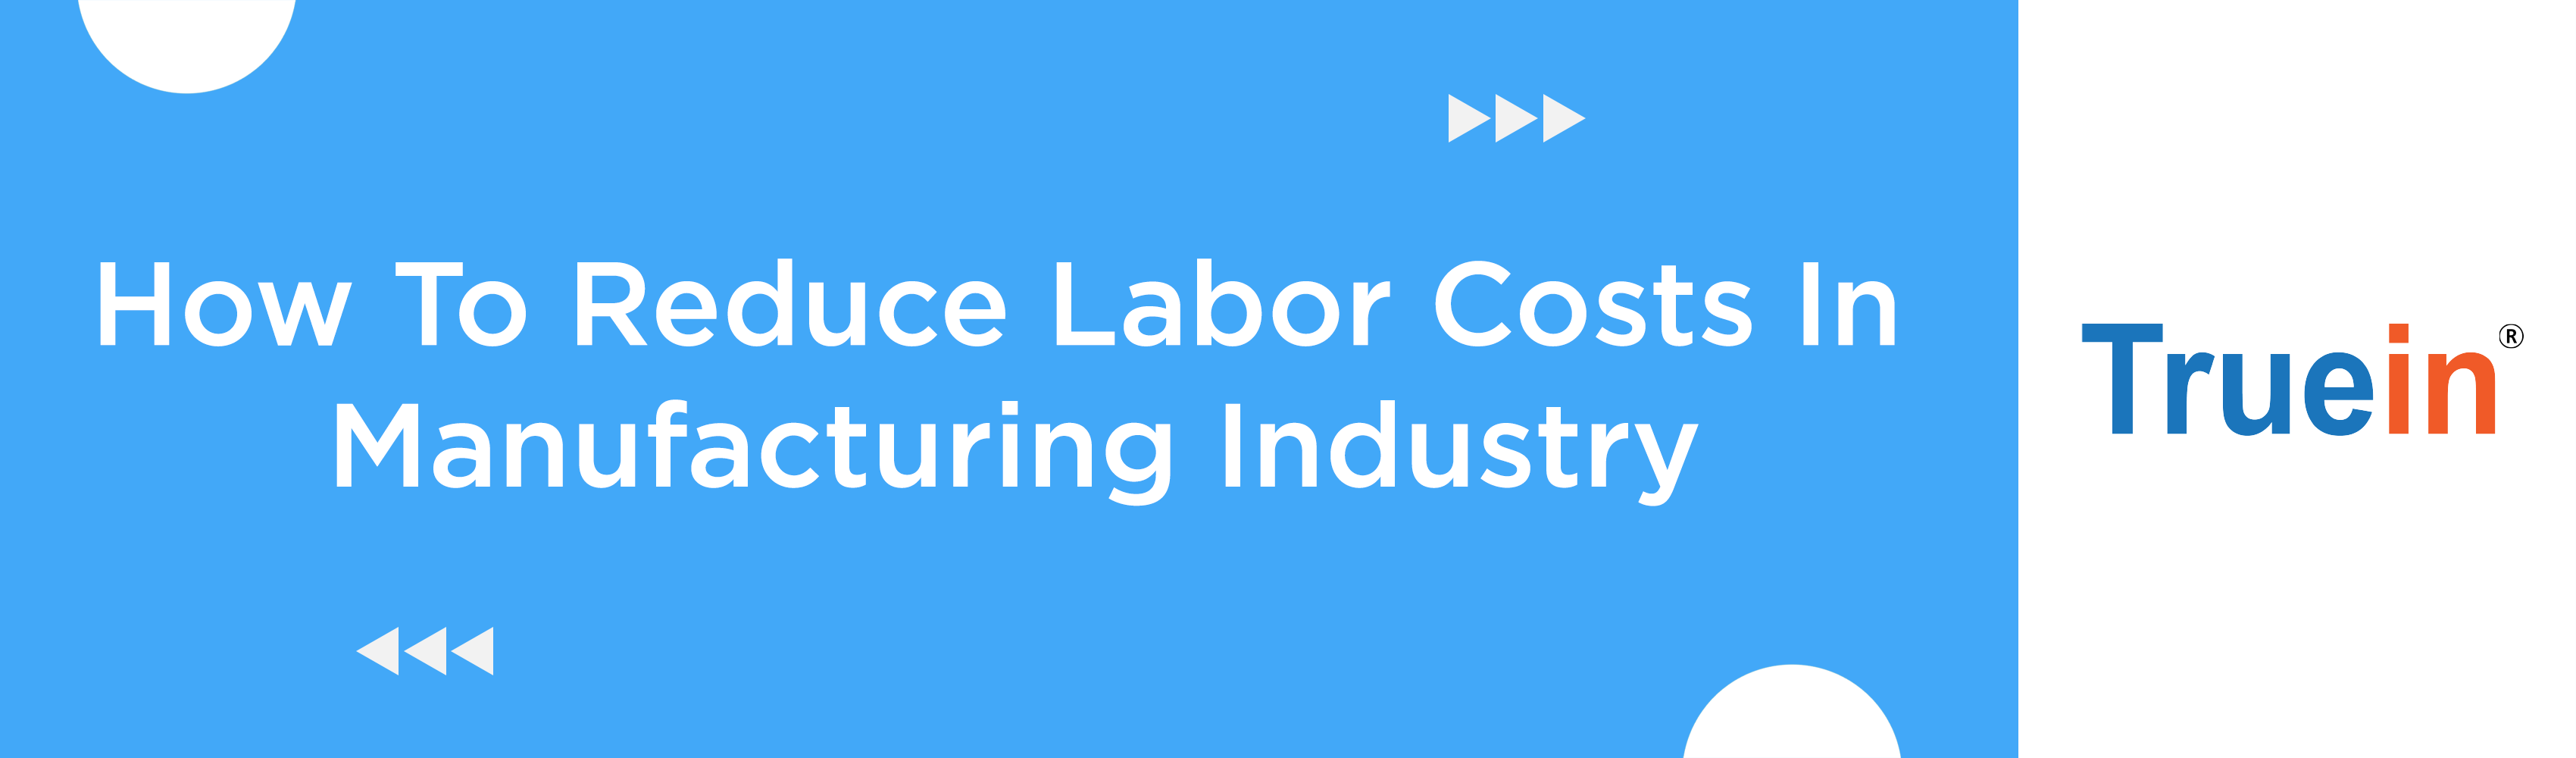 How To Reduce Labor Costs In Manufacturing Industry